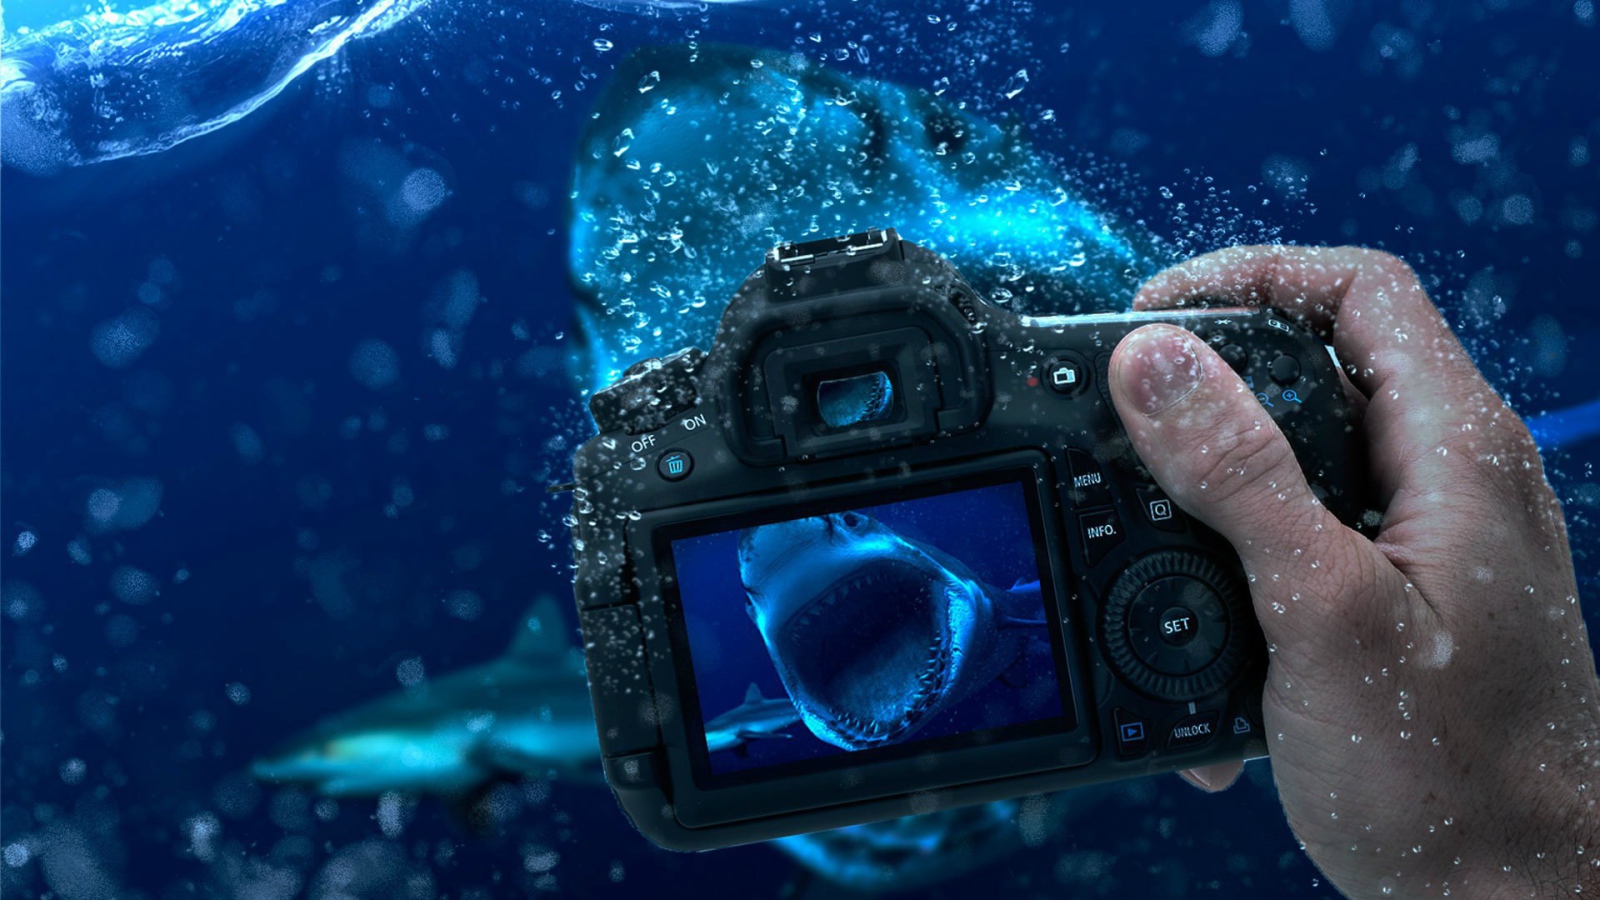 Occupation underwater photography